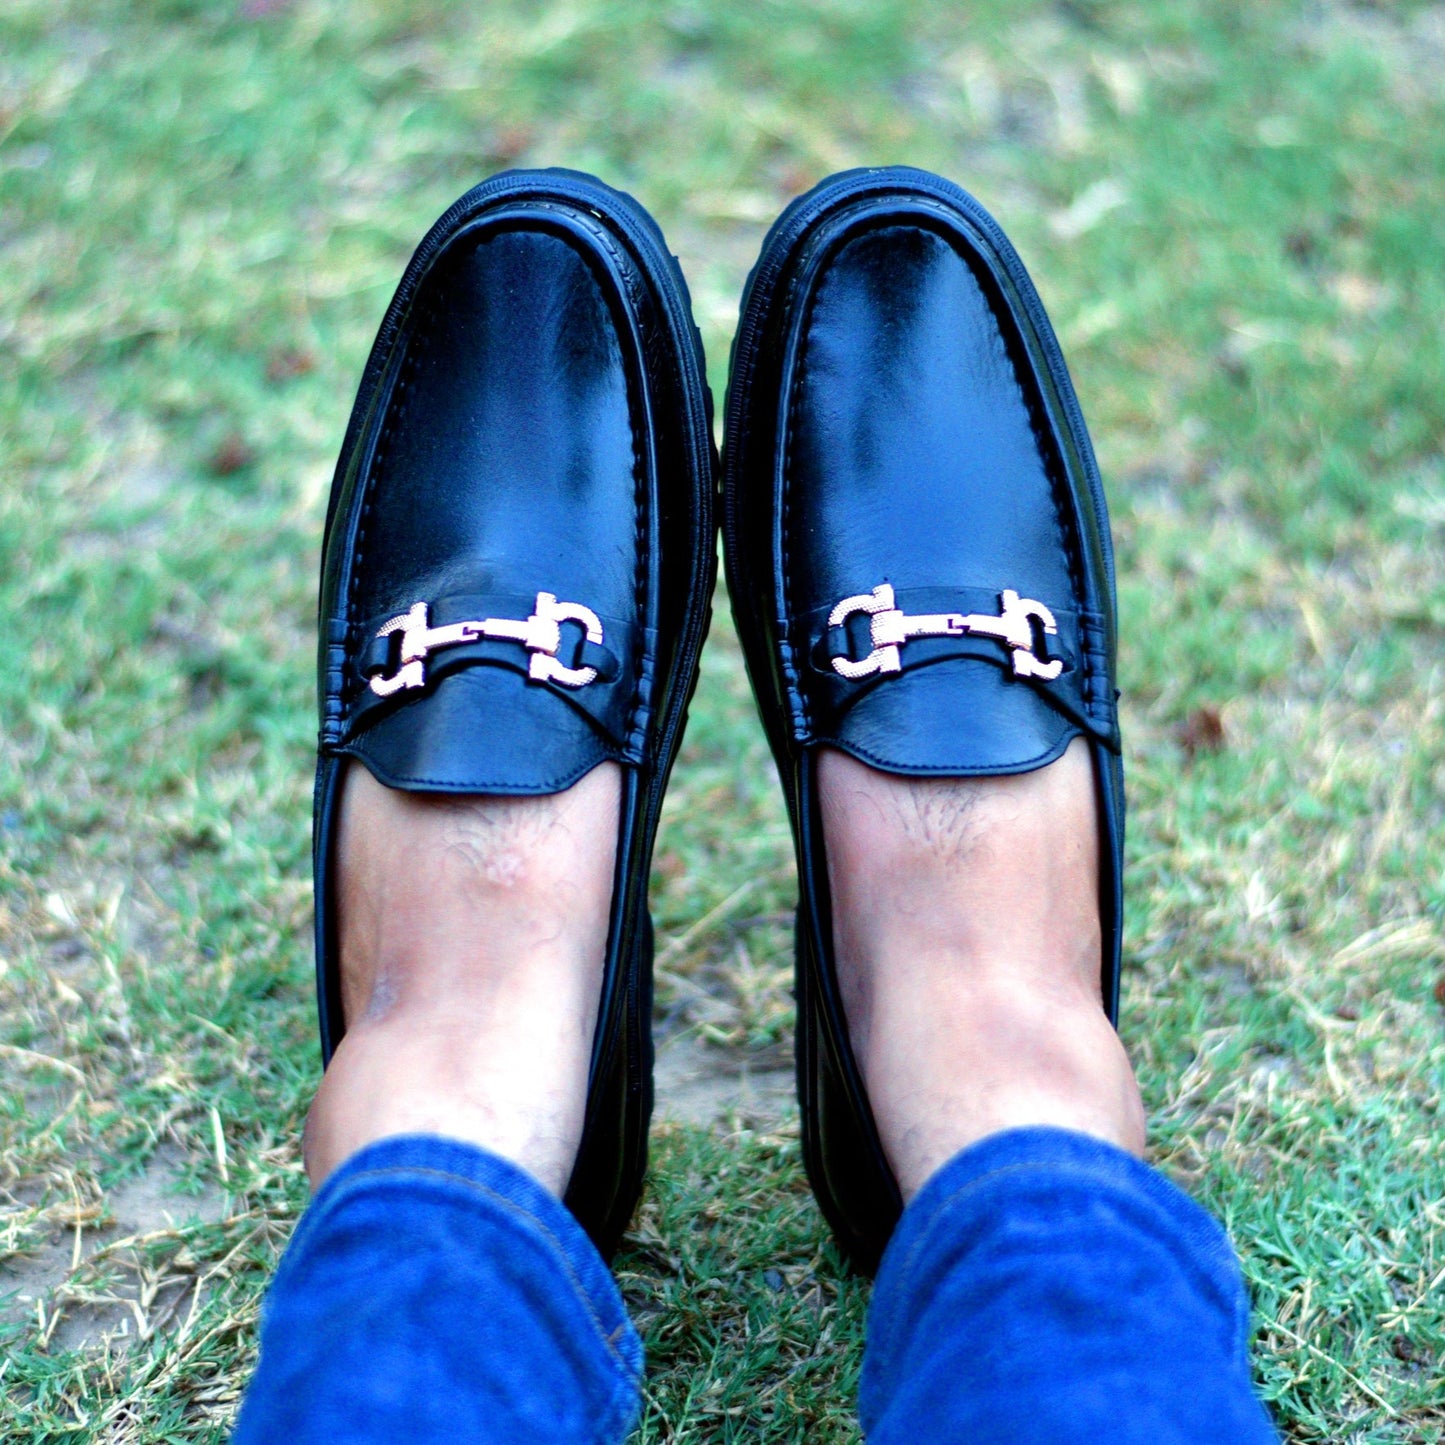 Leather Black Loafers- UK 6104